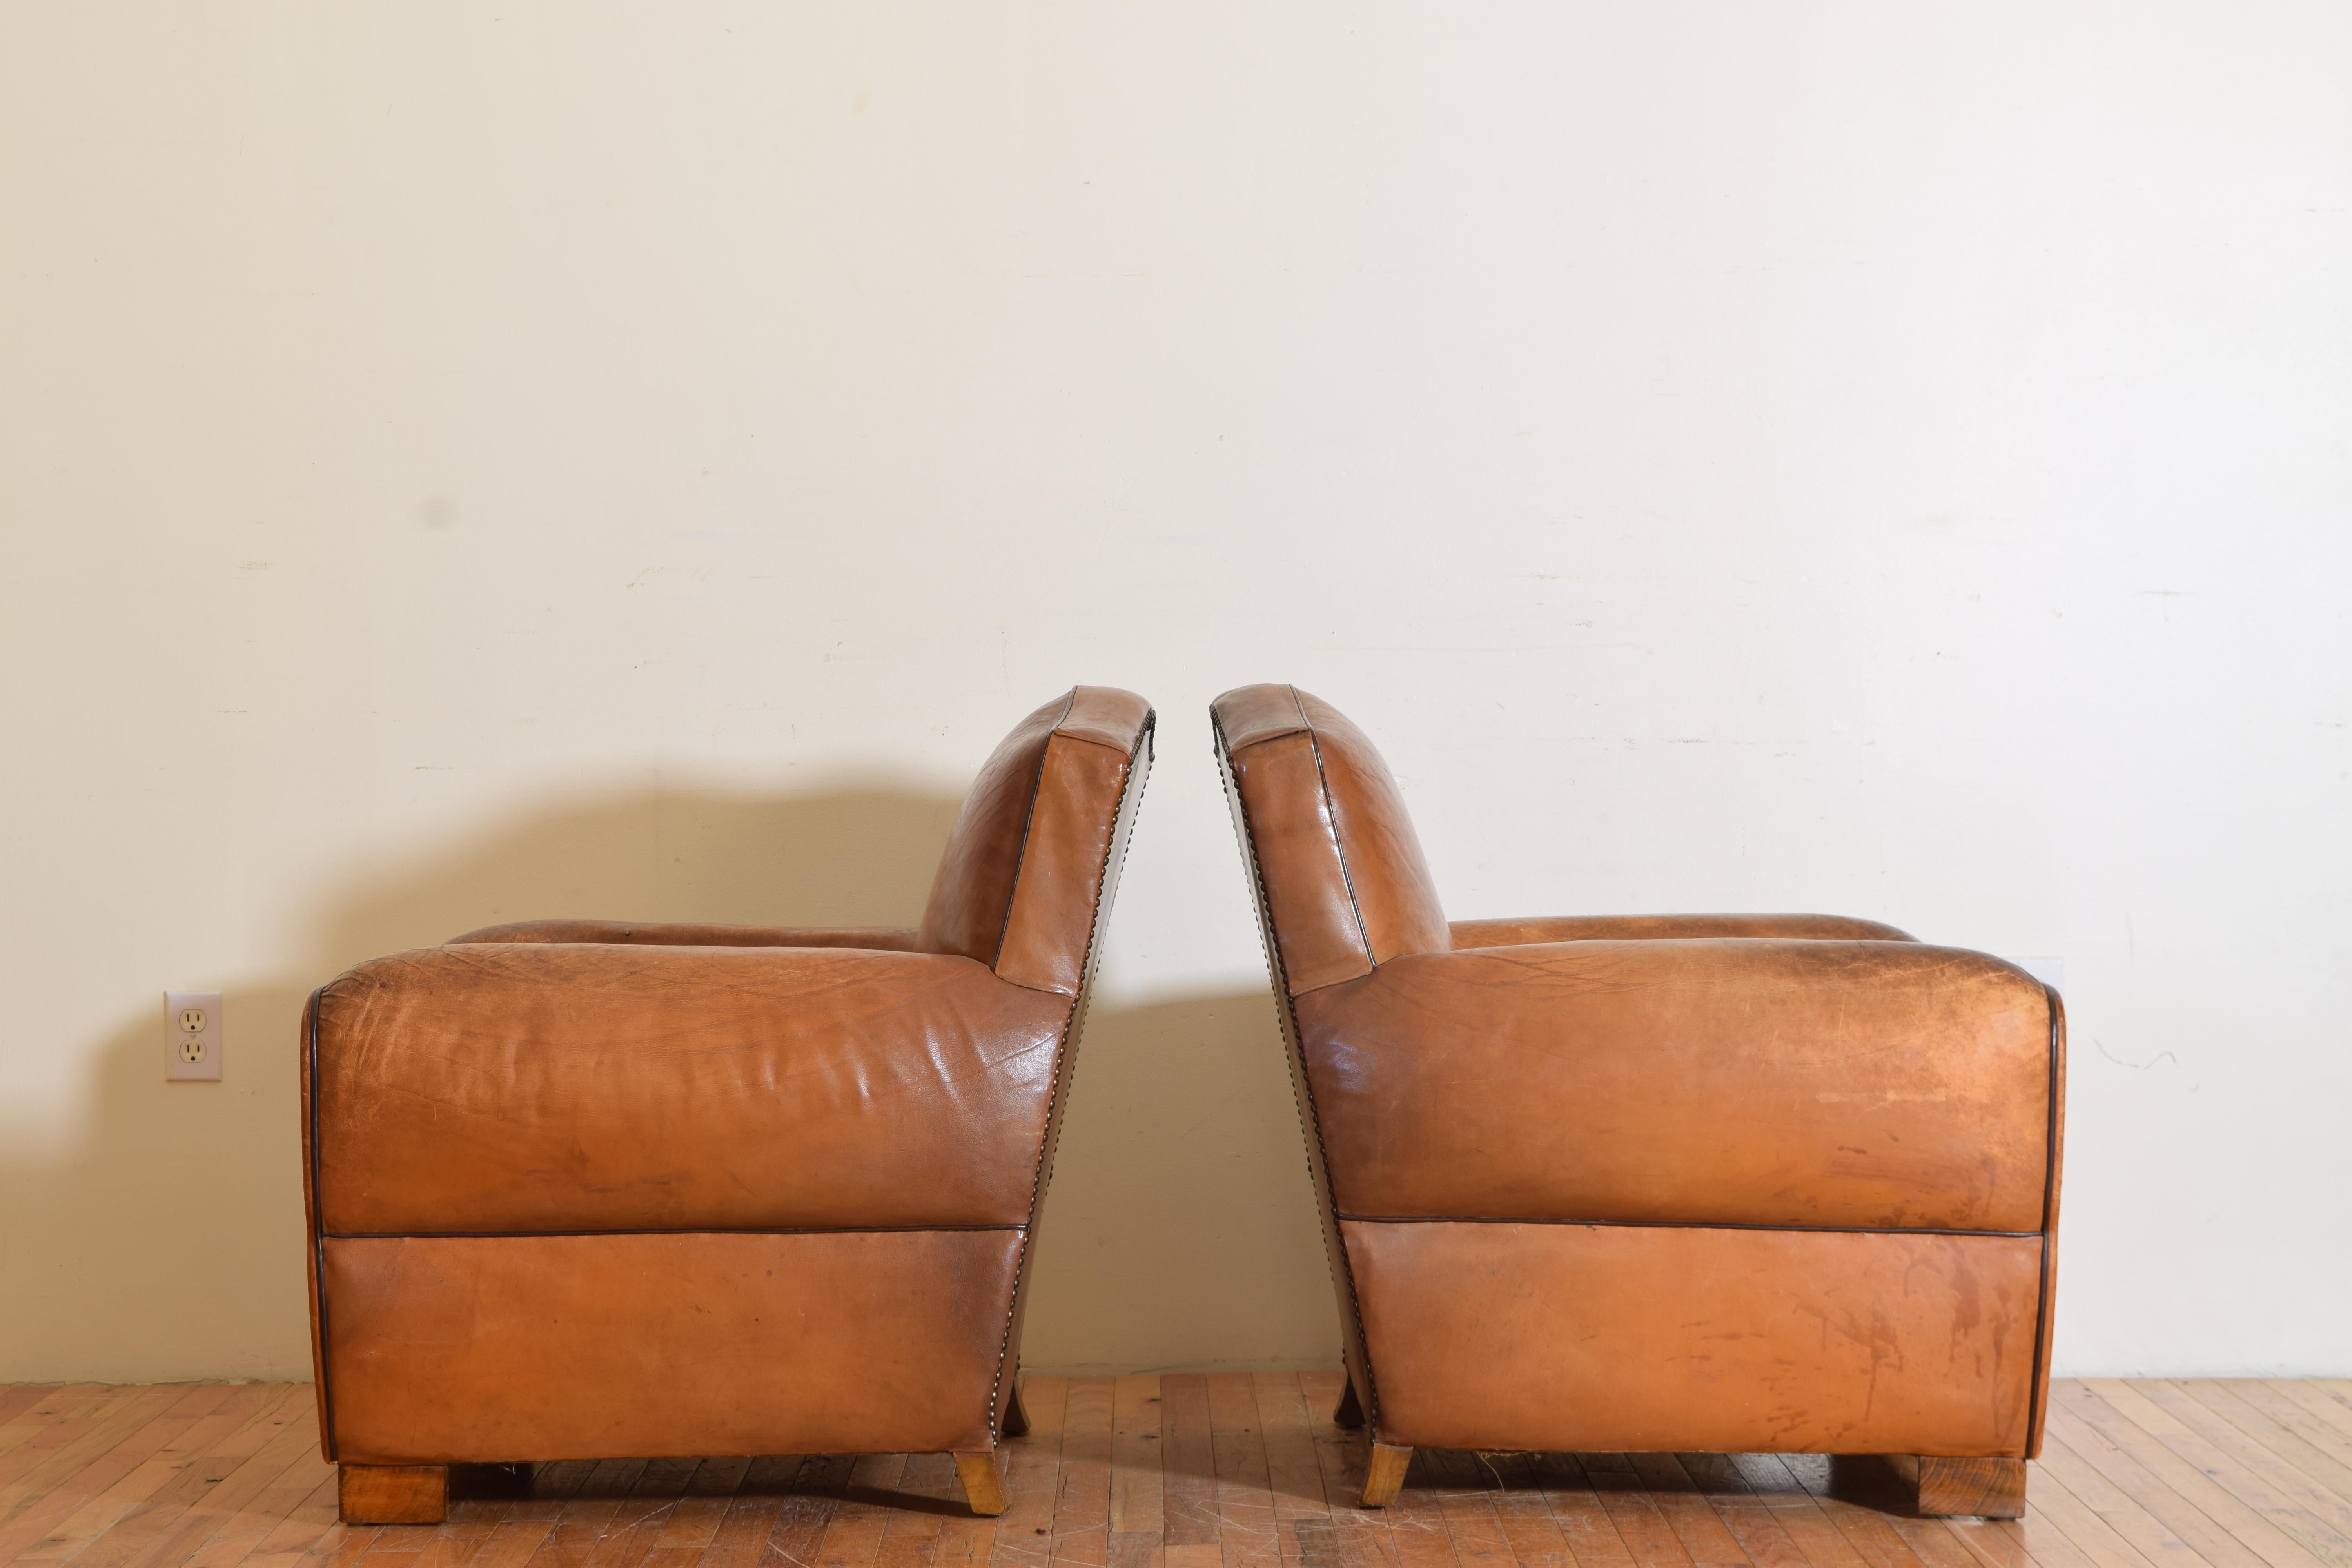 20th Century French Art Deco Pair of Leather & Velvet Upholstered Club Chairs, ca 1920-1930